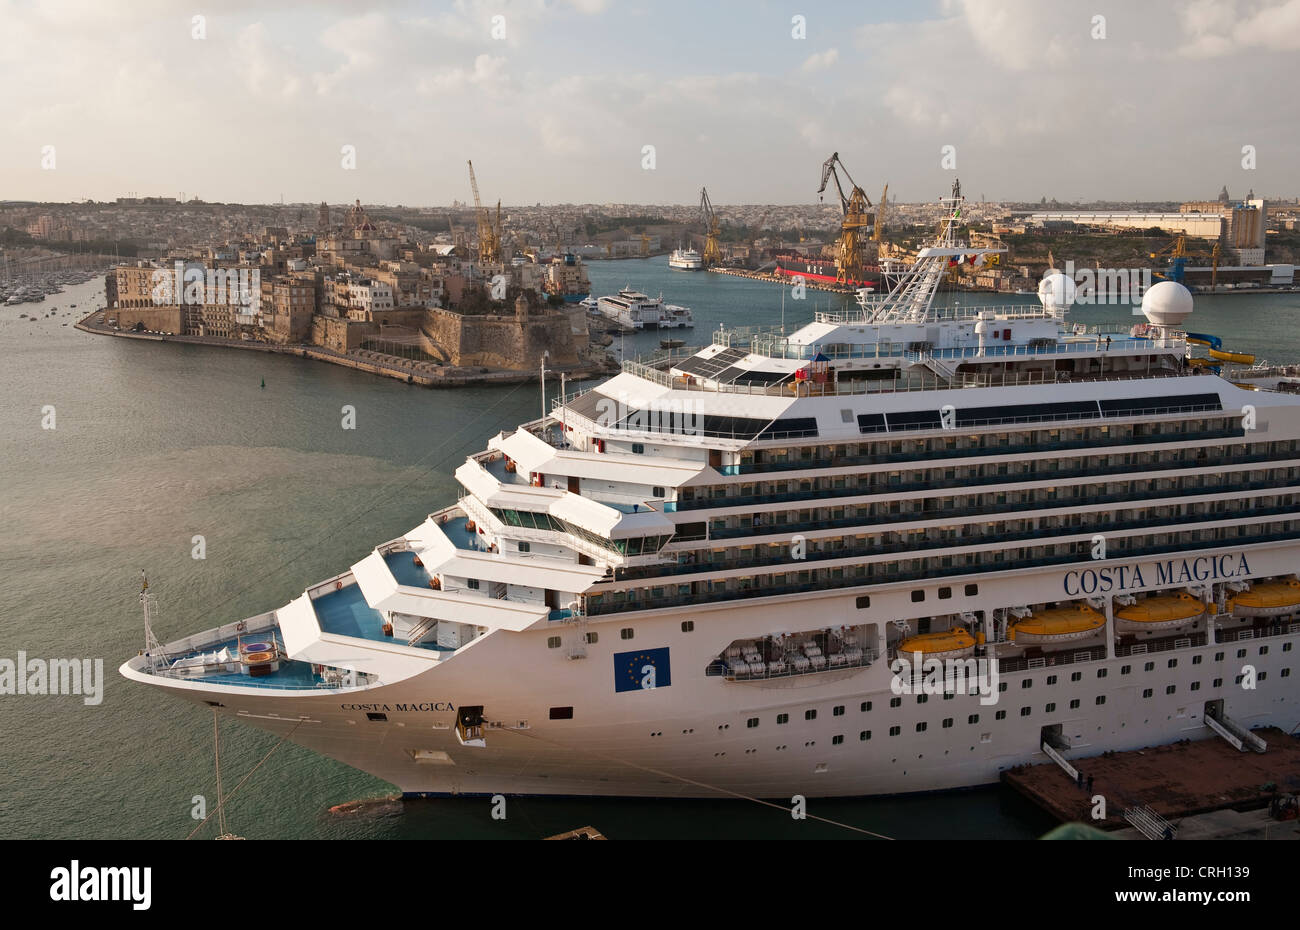 The Costa Magica cruise ship moored in the Grand Harbour of Valletta, Malta, with Fort St Michael in the background Stock Photo